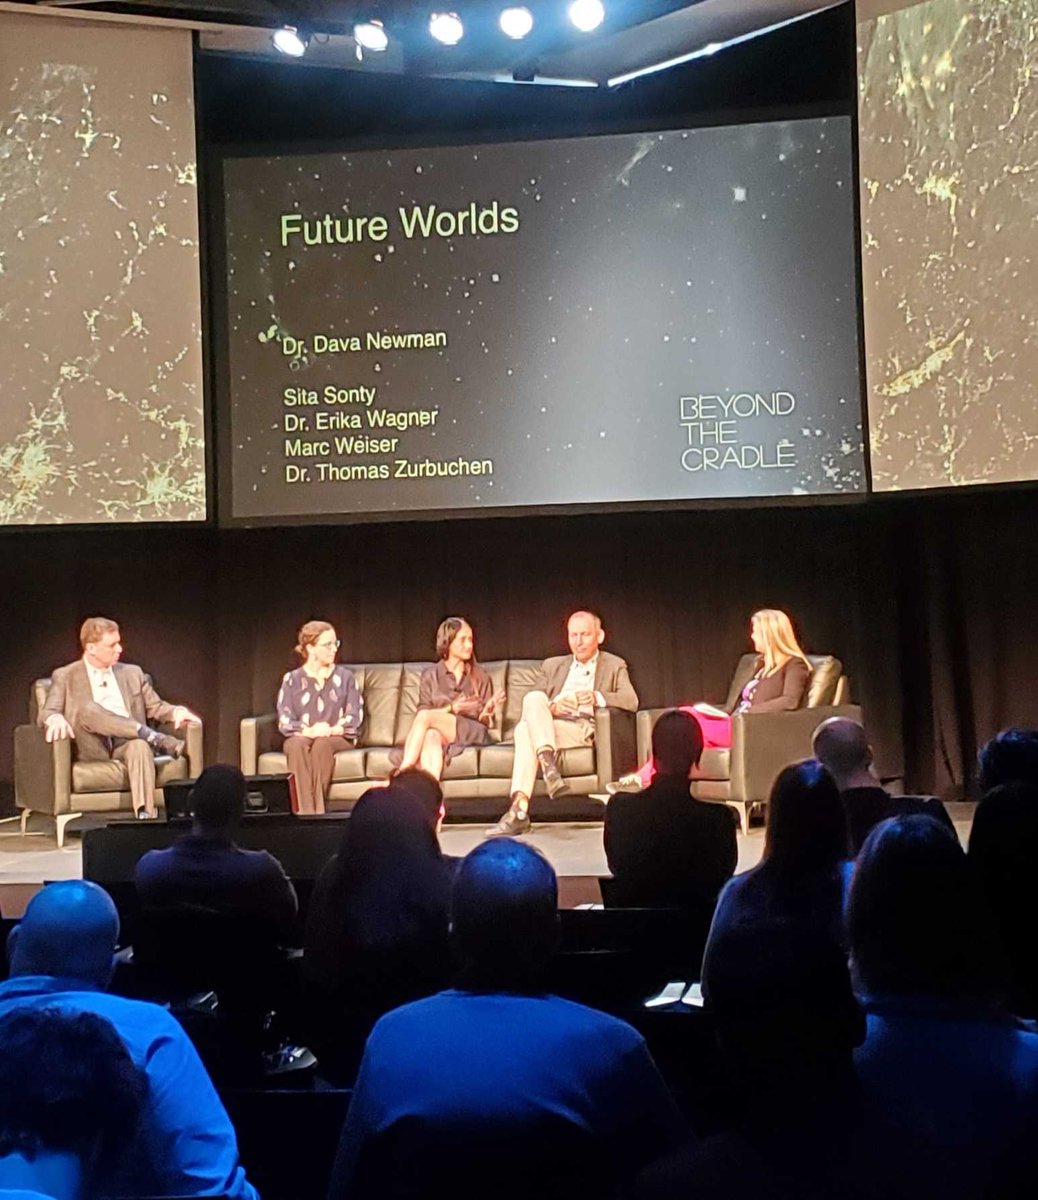 Panel: Future Worlds @Dr_ThomasZ, Professor and leader, Space Programs at ETH Zurich Dr. Erika Wagner, Senior Director of Emerging Market Development, Blue Origin @RPMmarc, Founder and Managing Director, RPM Ventures Sita Sonty, CEO, Space Tango Moderated by Dr. @DavaExplorer